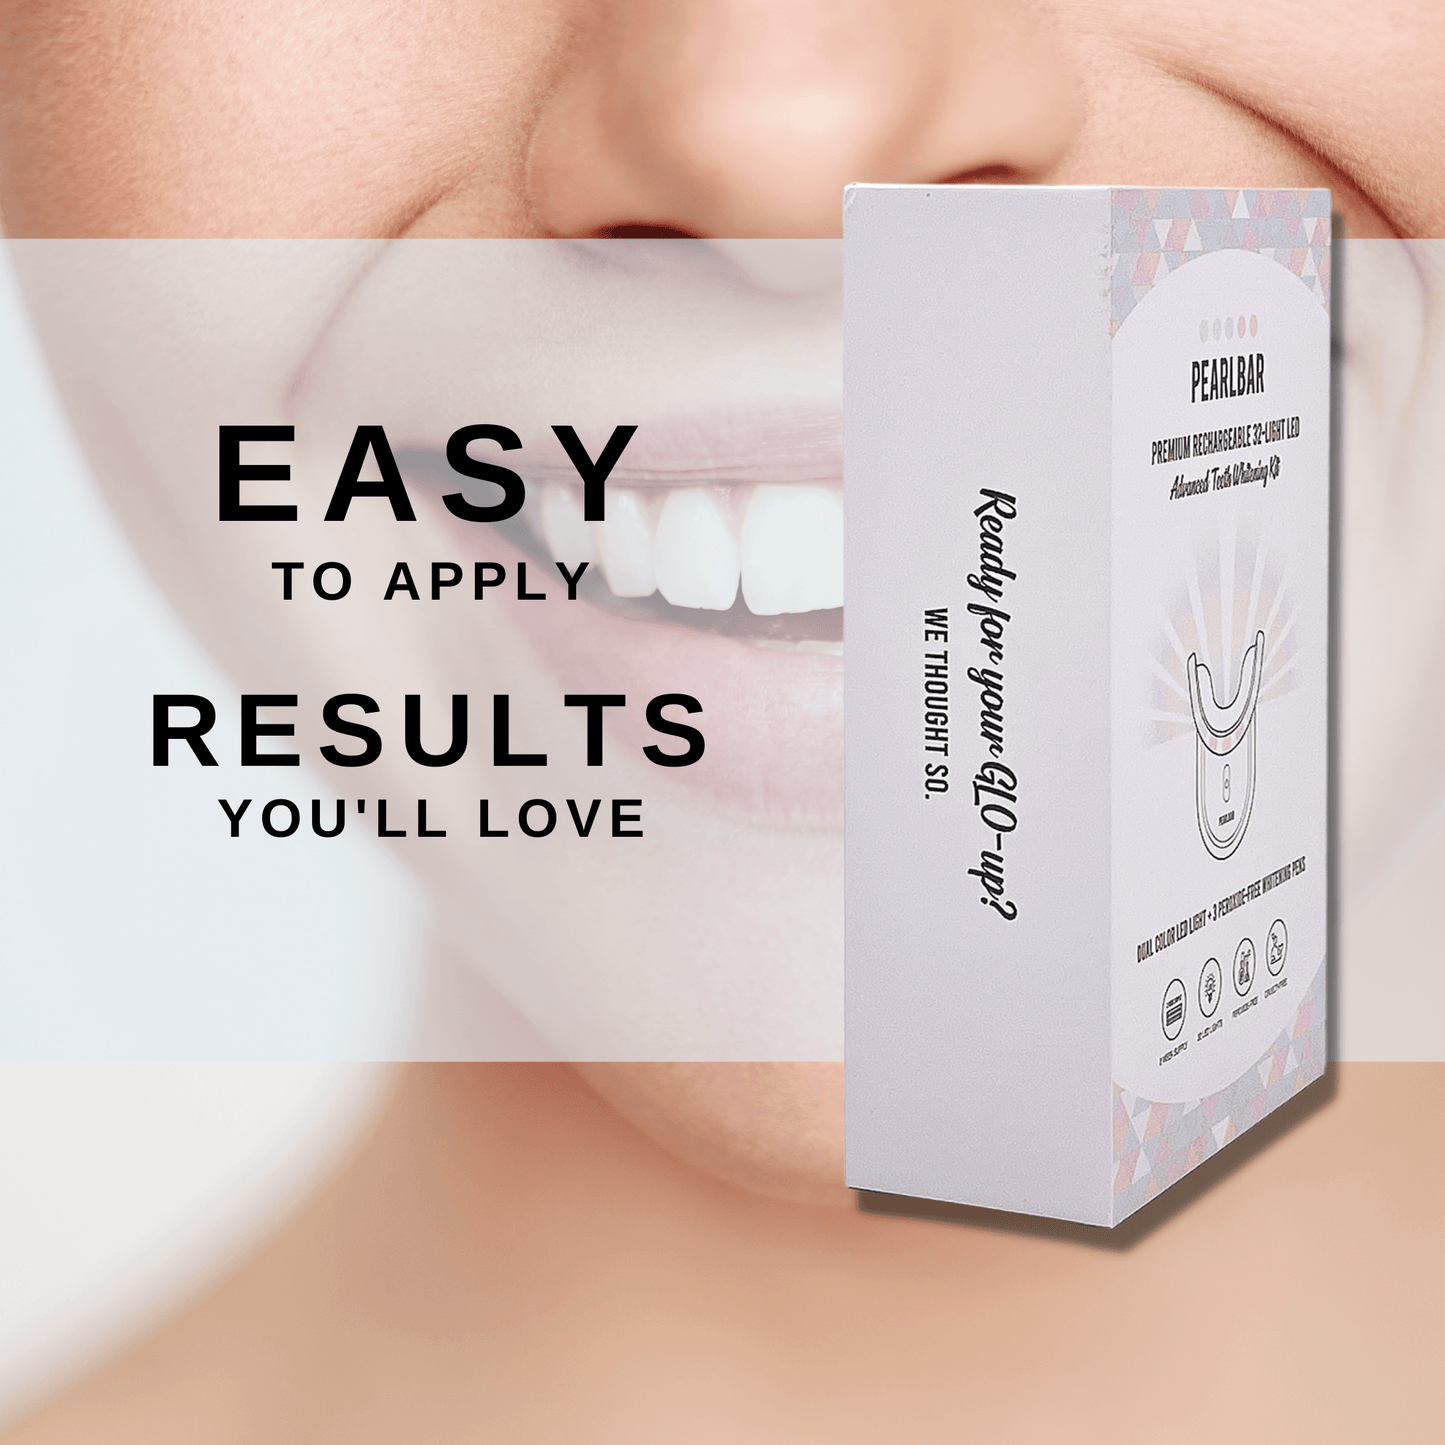 
                  
                    PearlBar Premium LED At-Home Teeth Whitening Kit is easy to use for the best teeth whitening results fast
                  
                